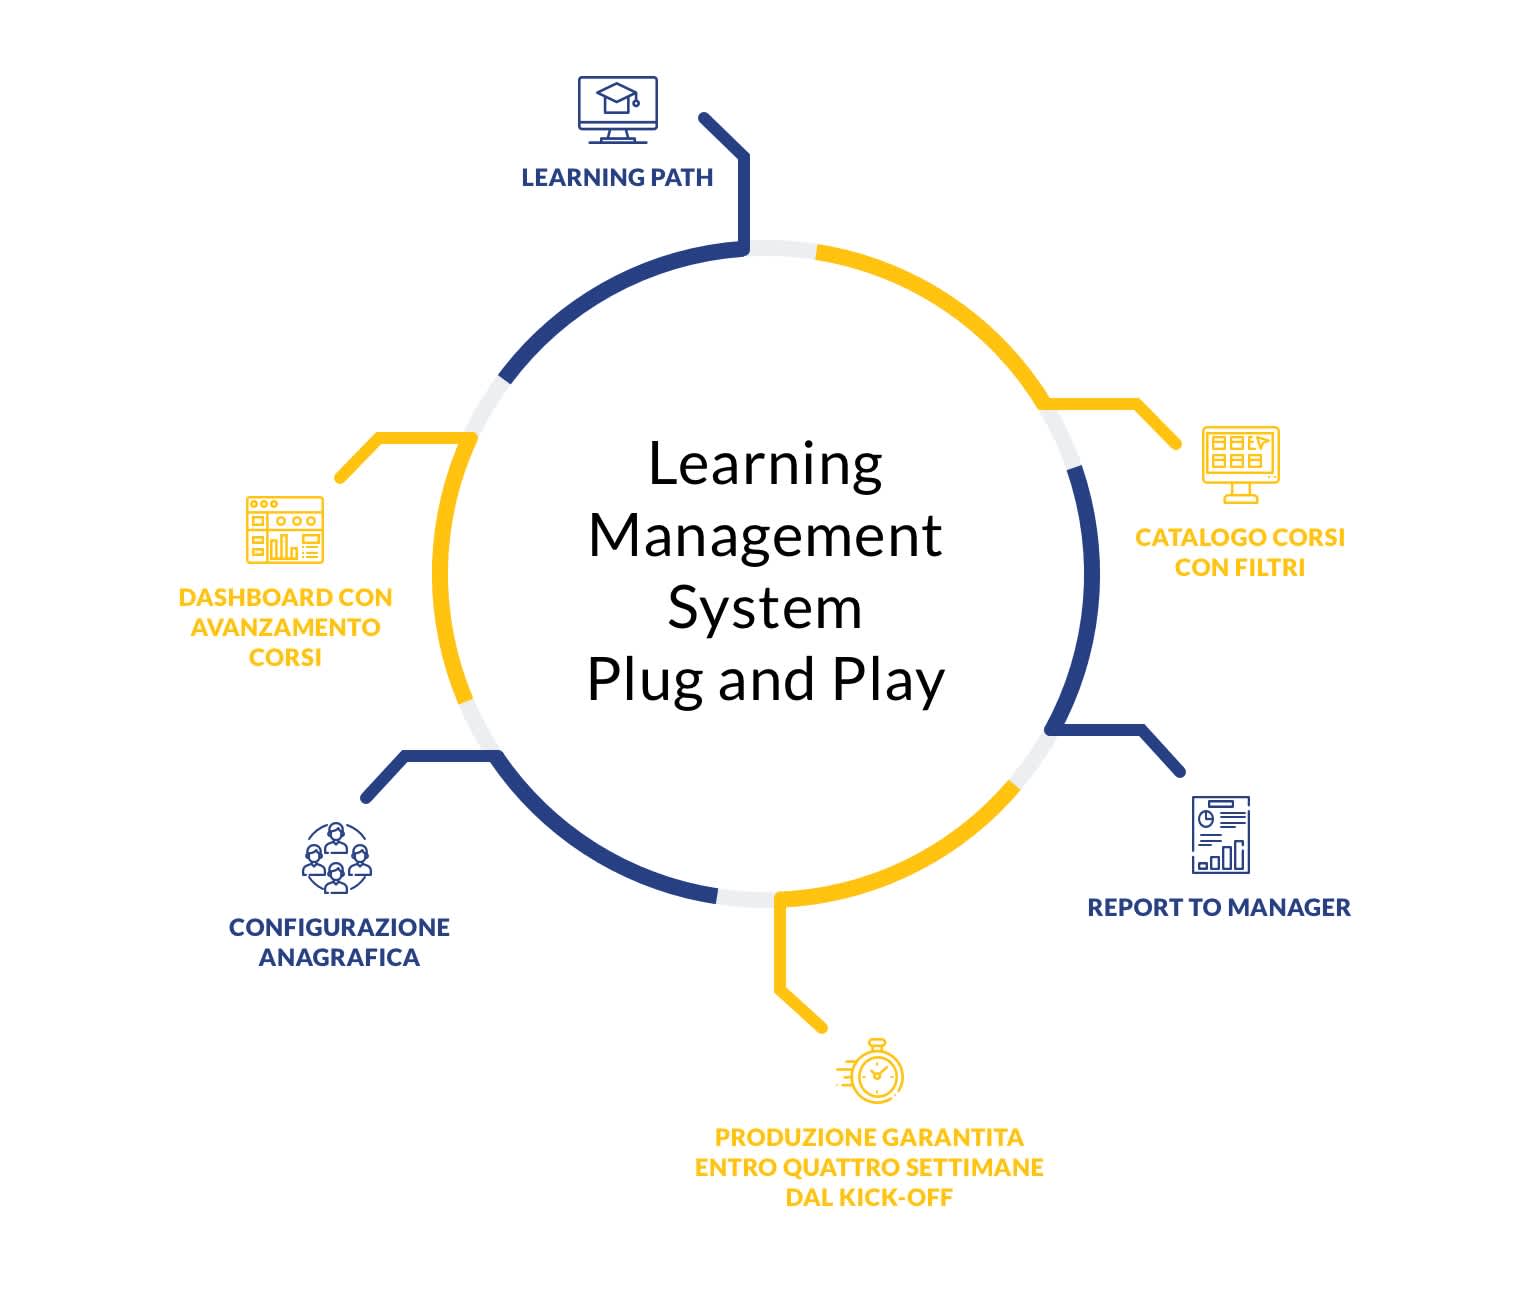 Learning Management System Plug and Play